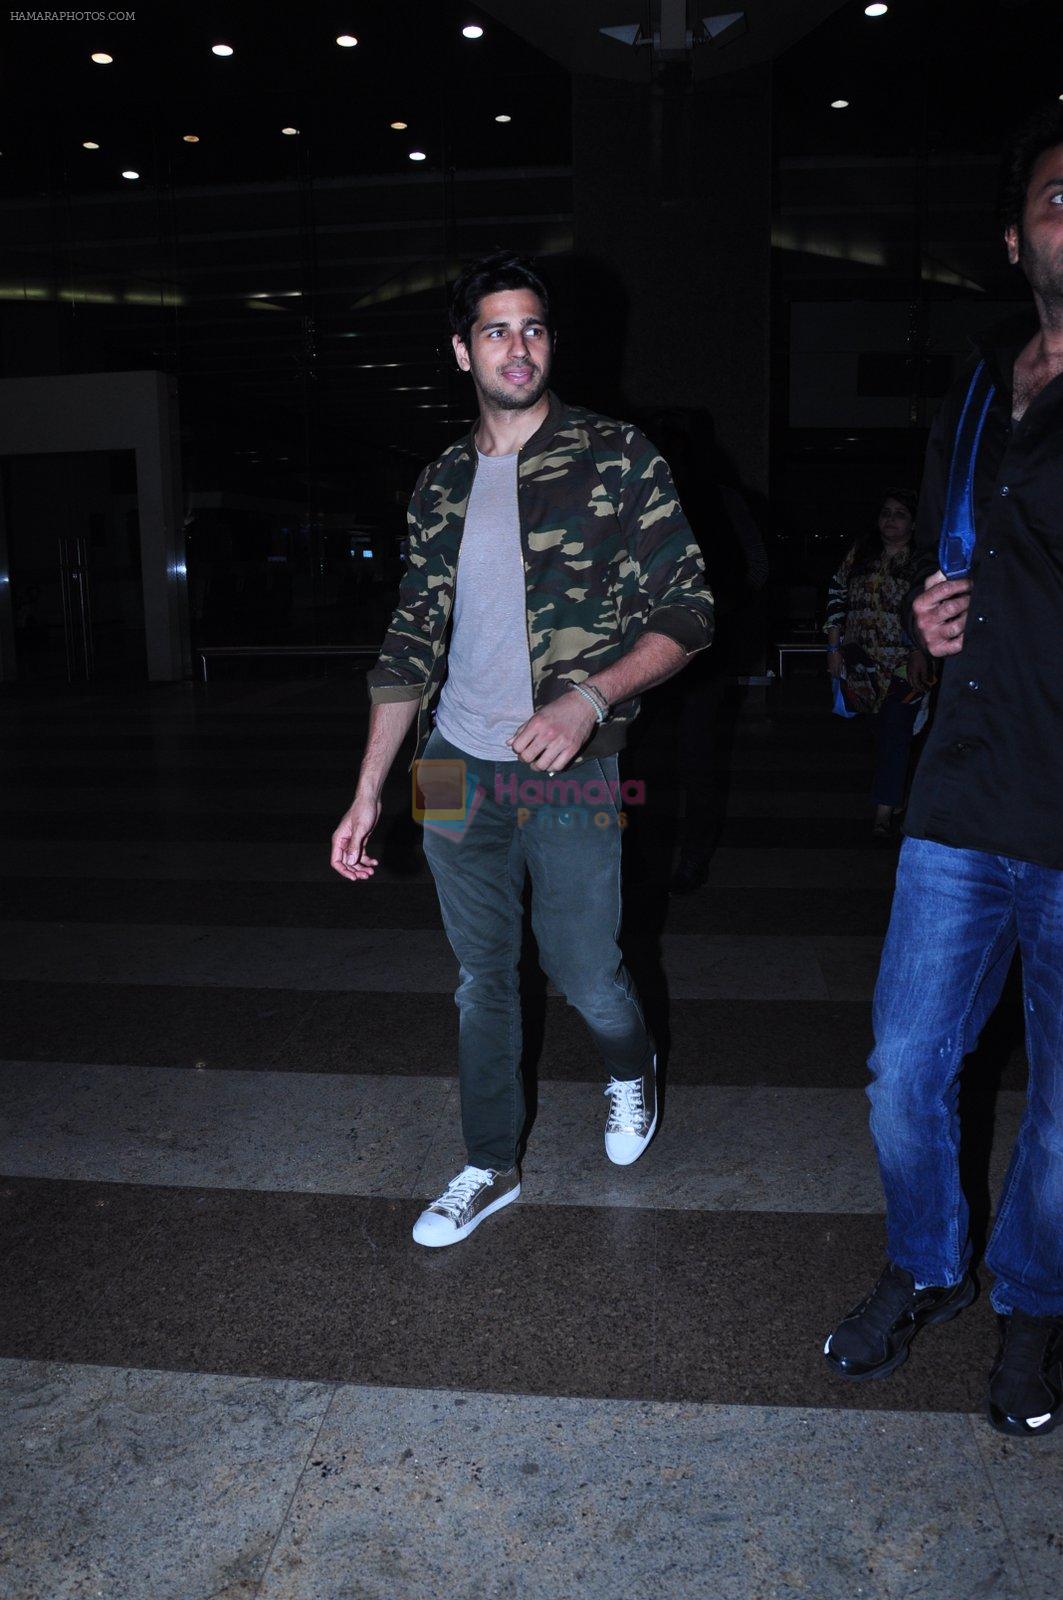 Sidharth Malhotra return from Kapoor & Sons promotions on 10th March 2016